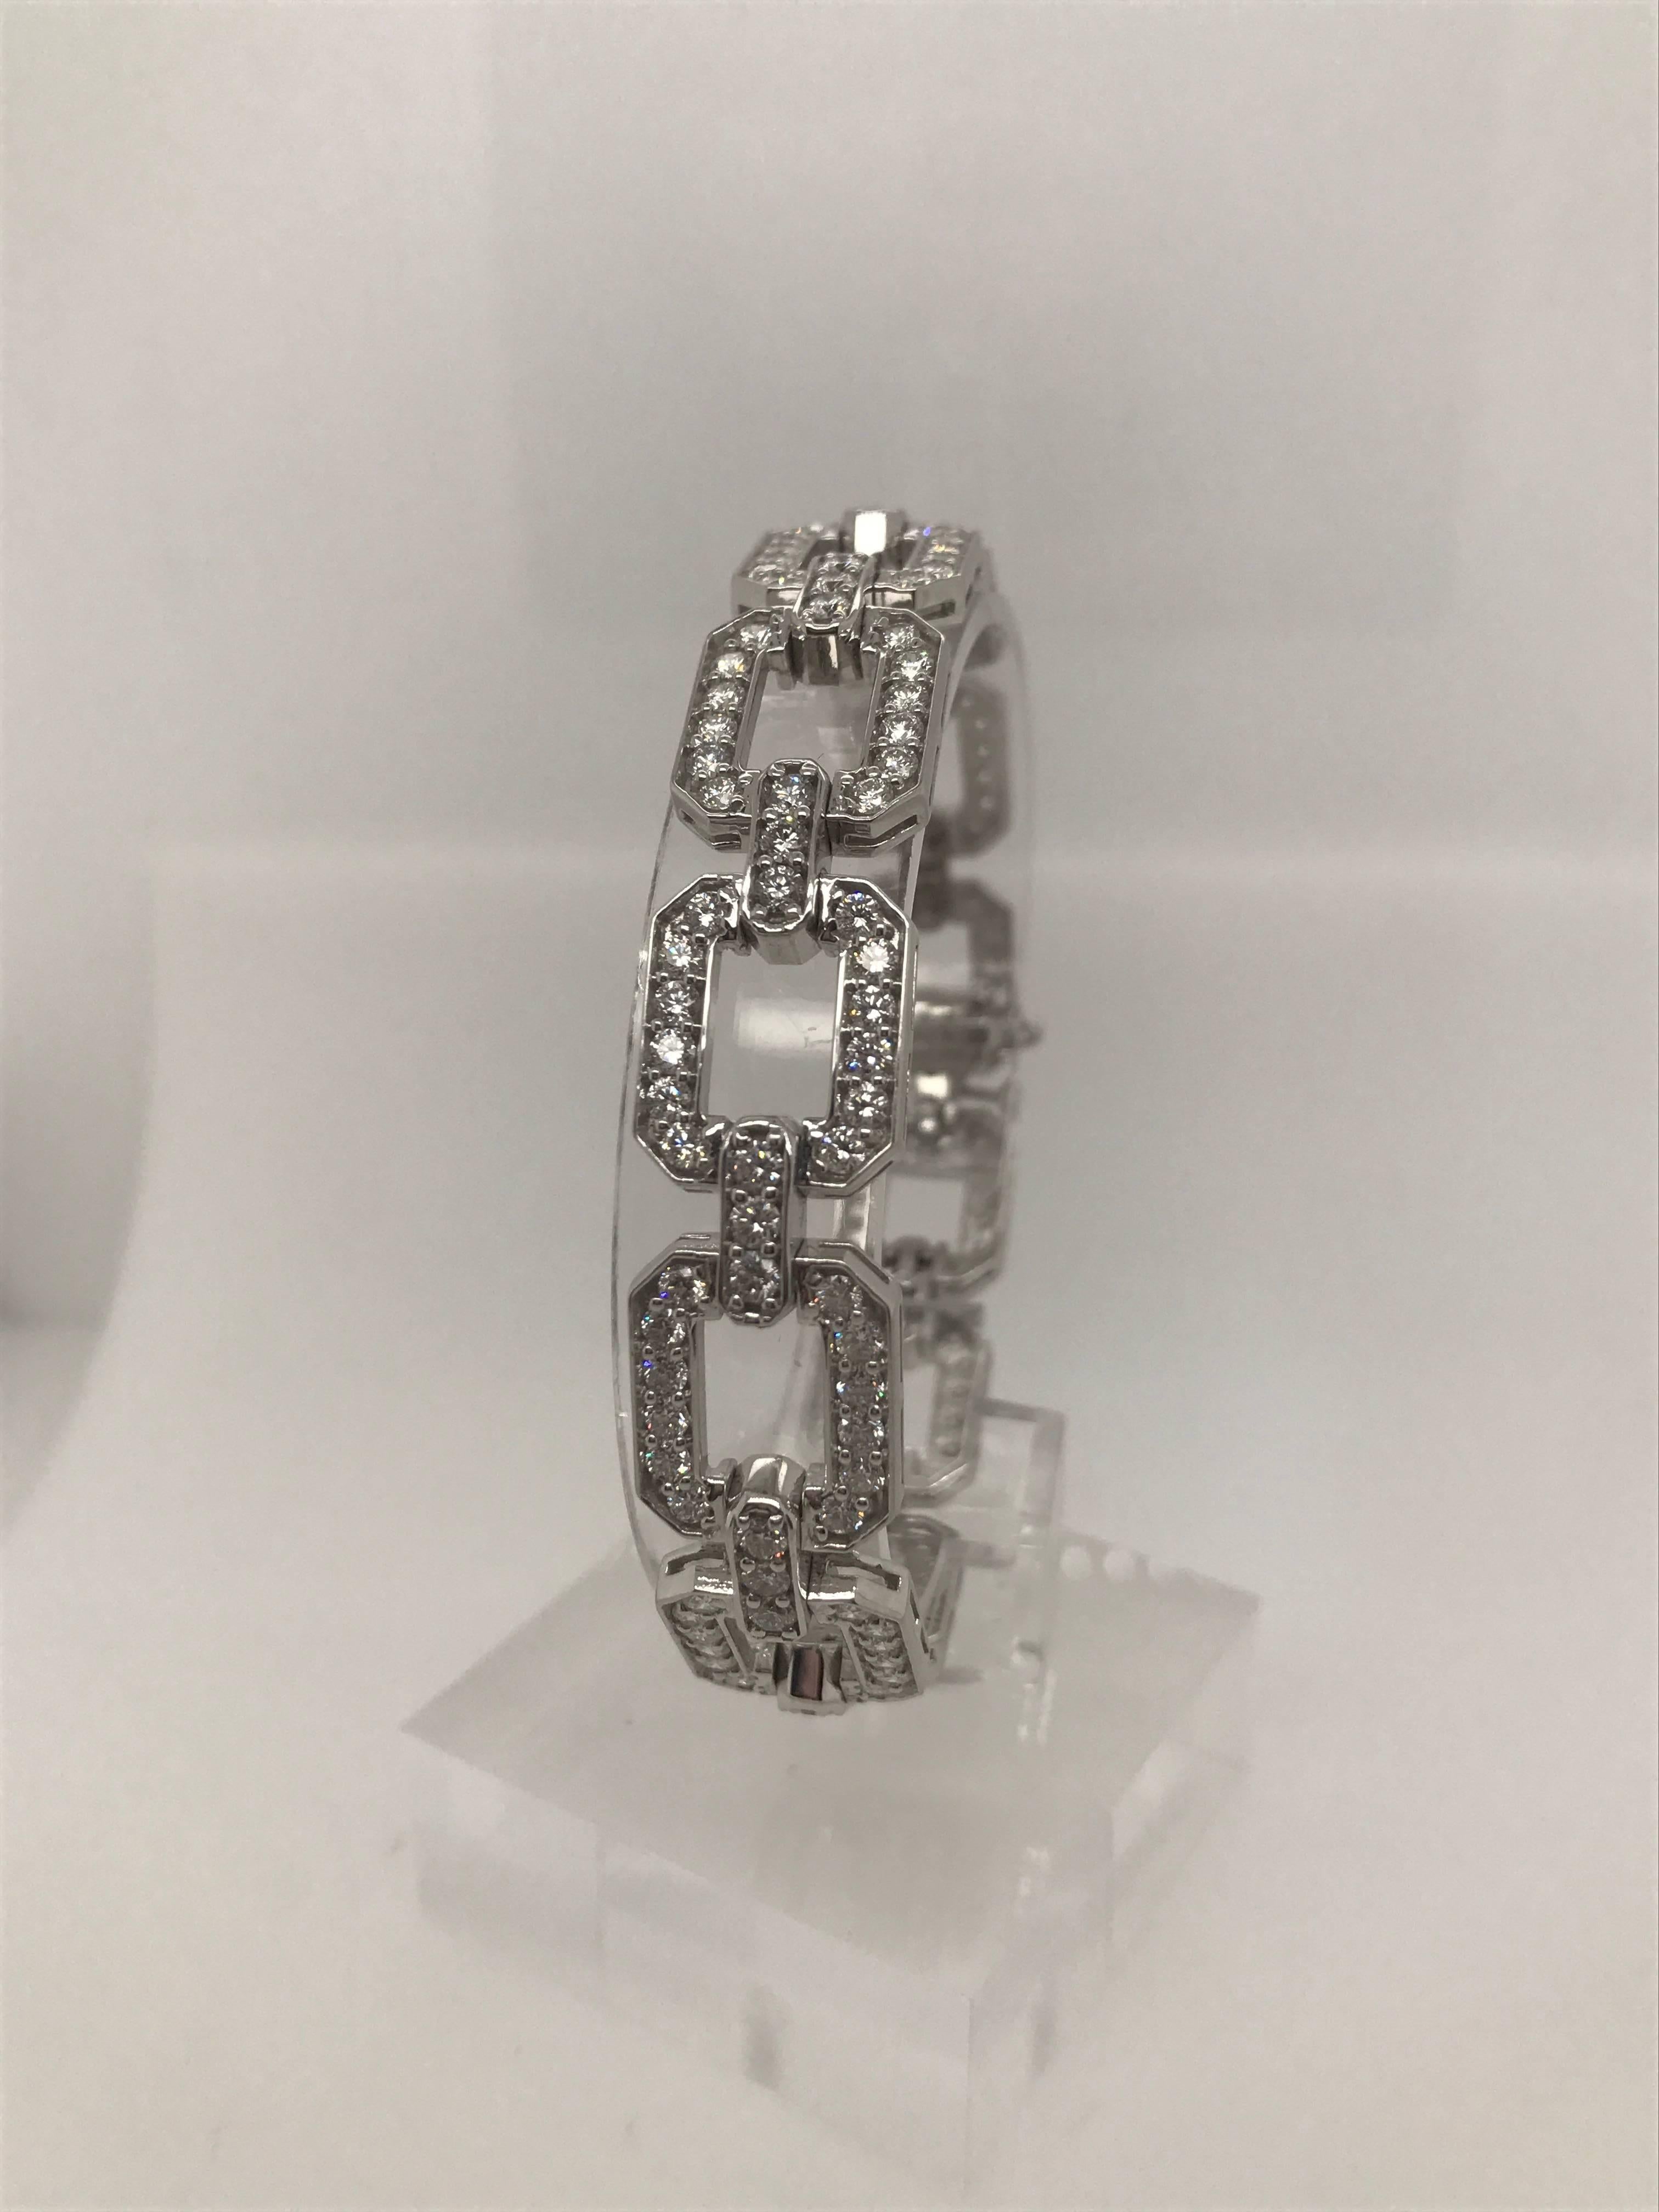 6.95-carat total diamond weight bracelet made of 14 Karat white gold and measuring 7 inches. 

NOTE: matching earrings available LU104514238151